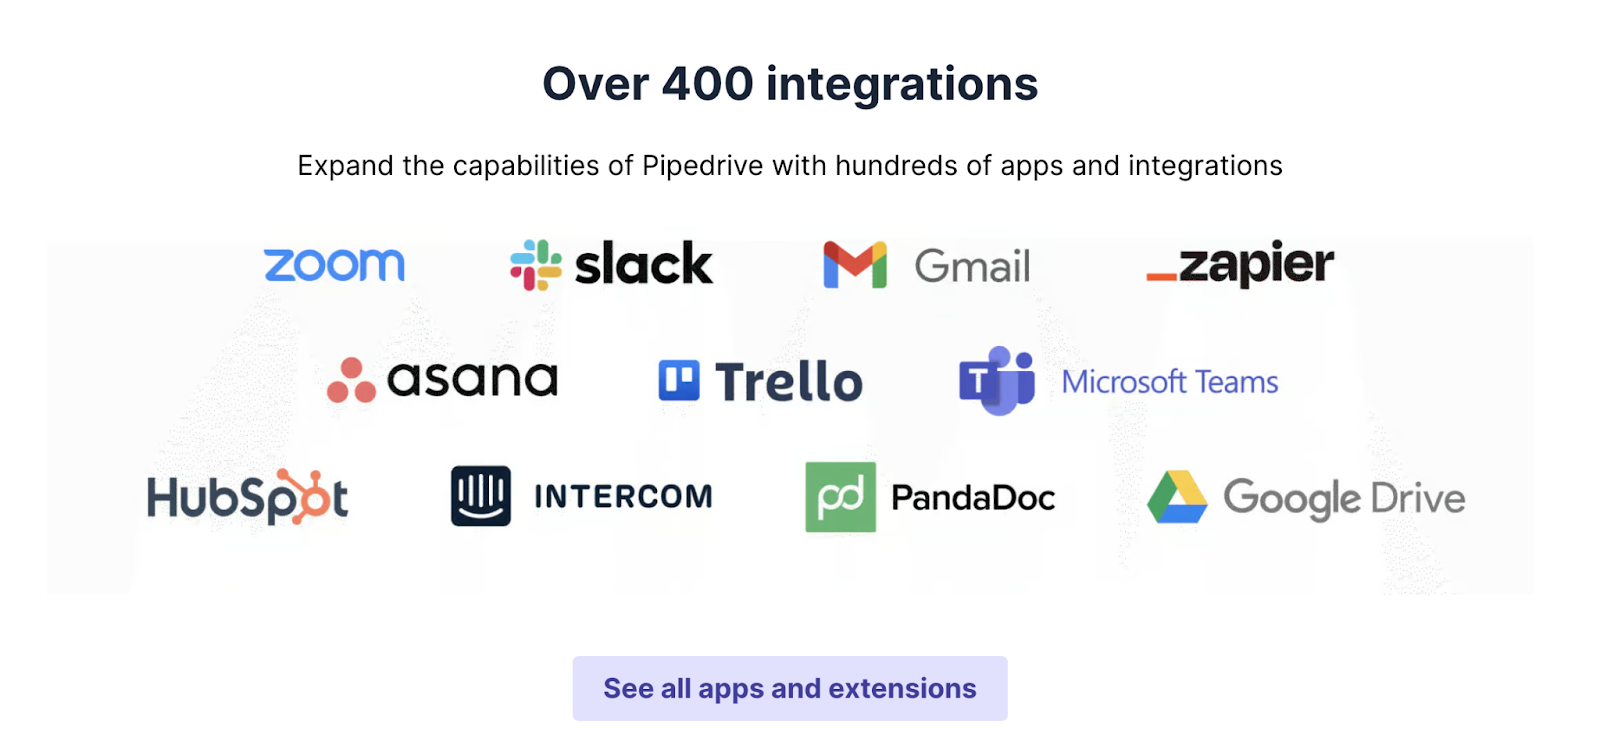 Pipedrive can be integrated with over 400 native and third-party applications.